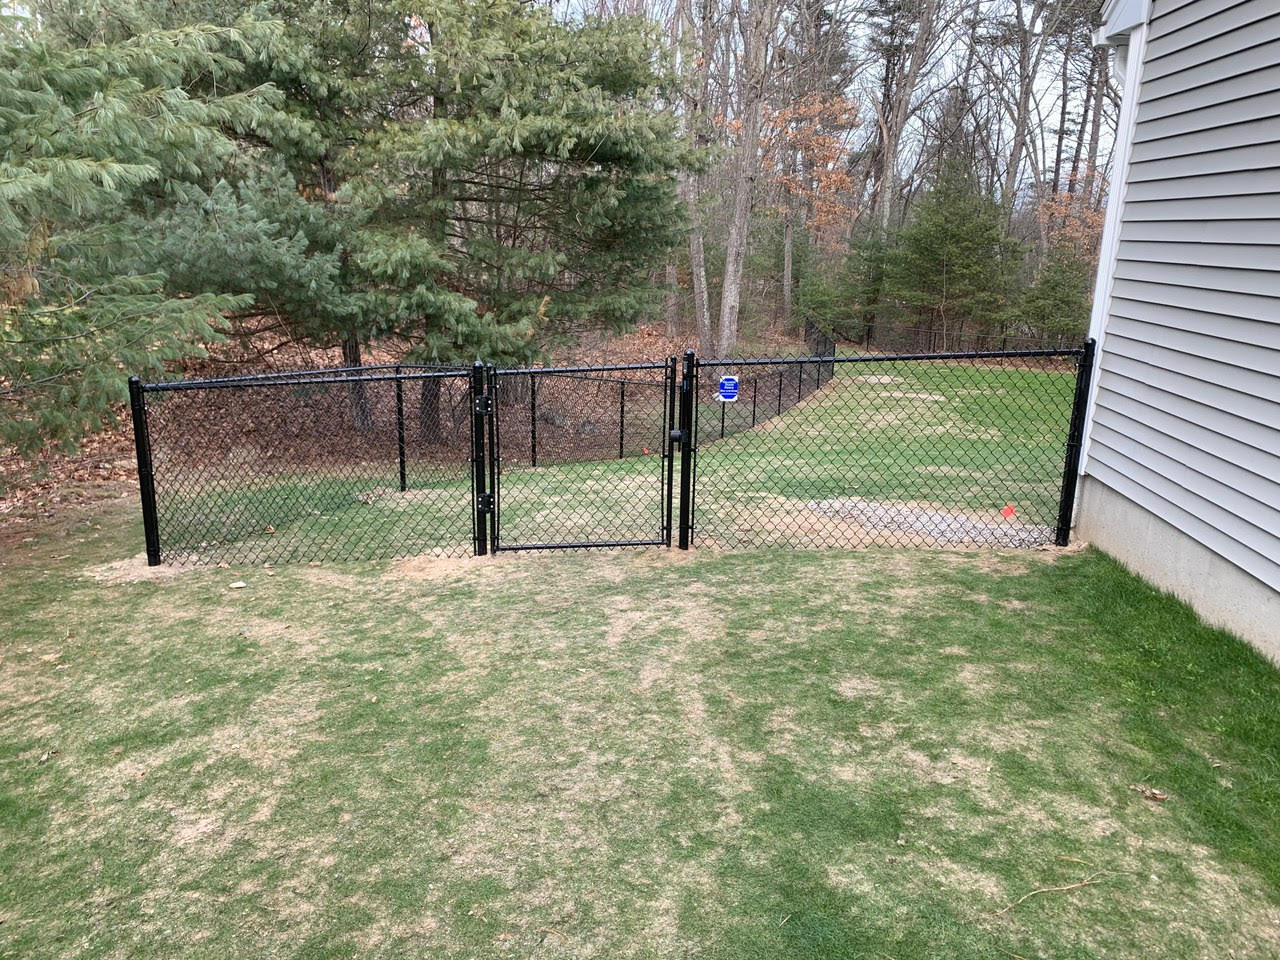 Black Chain Link Fencing installed in Pelham, NH.